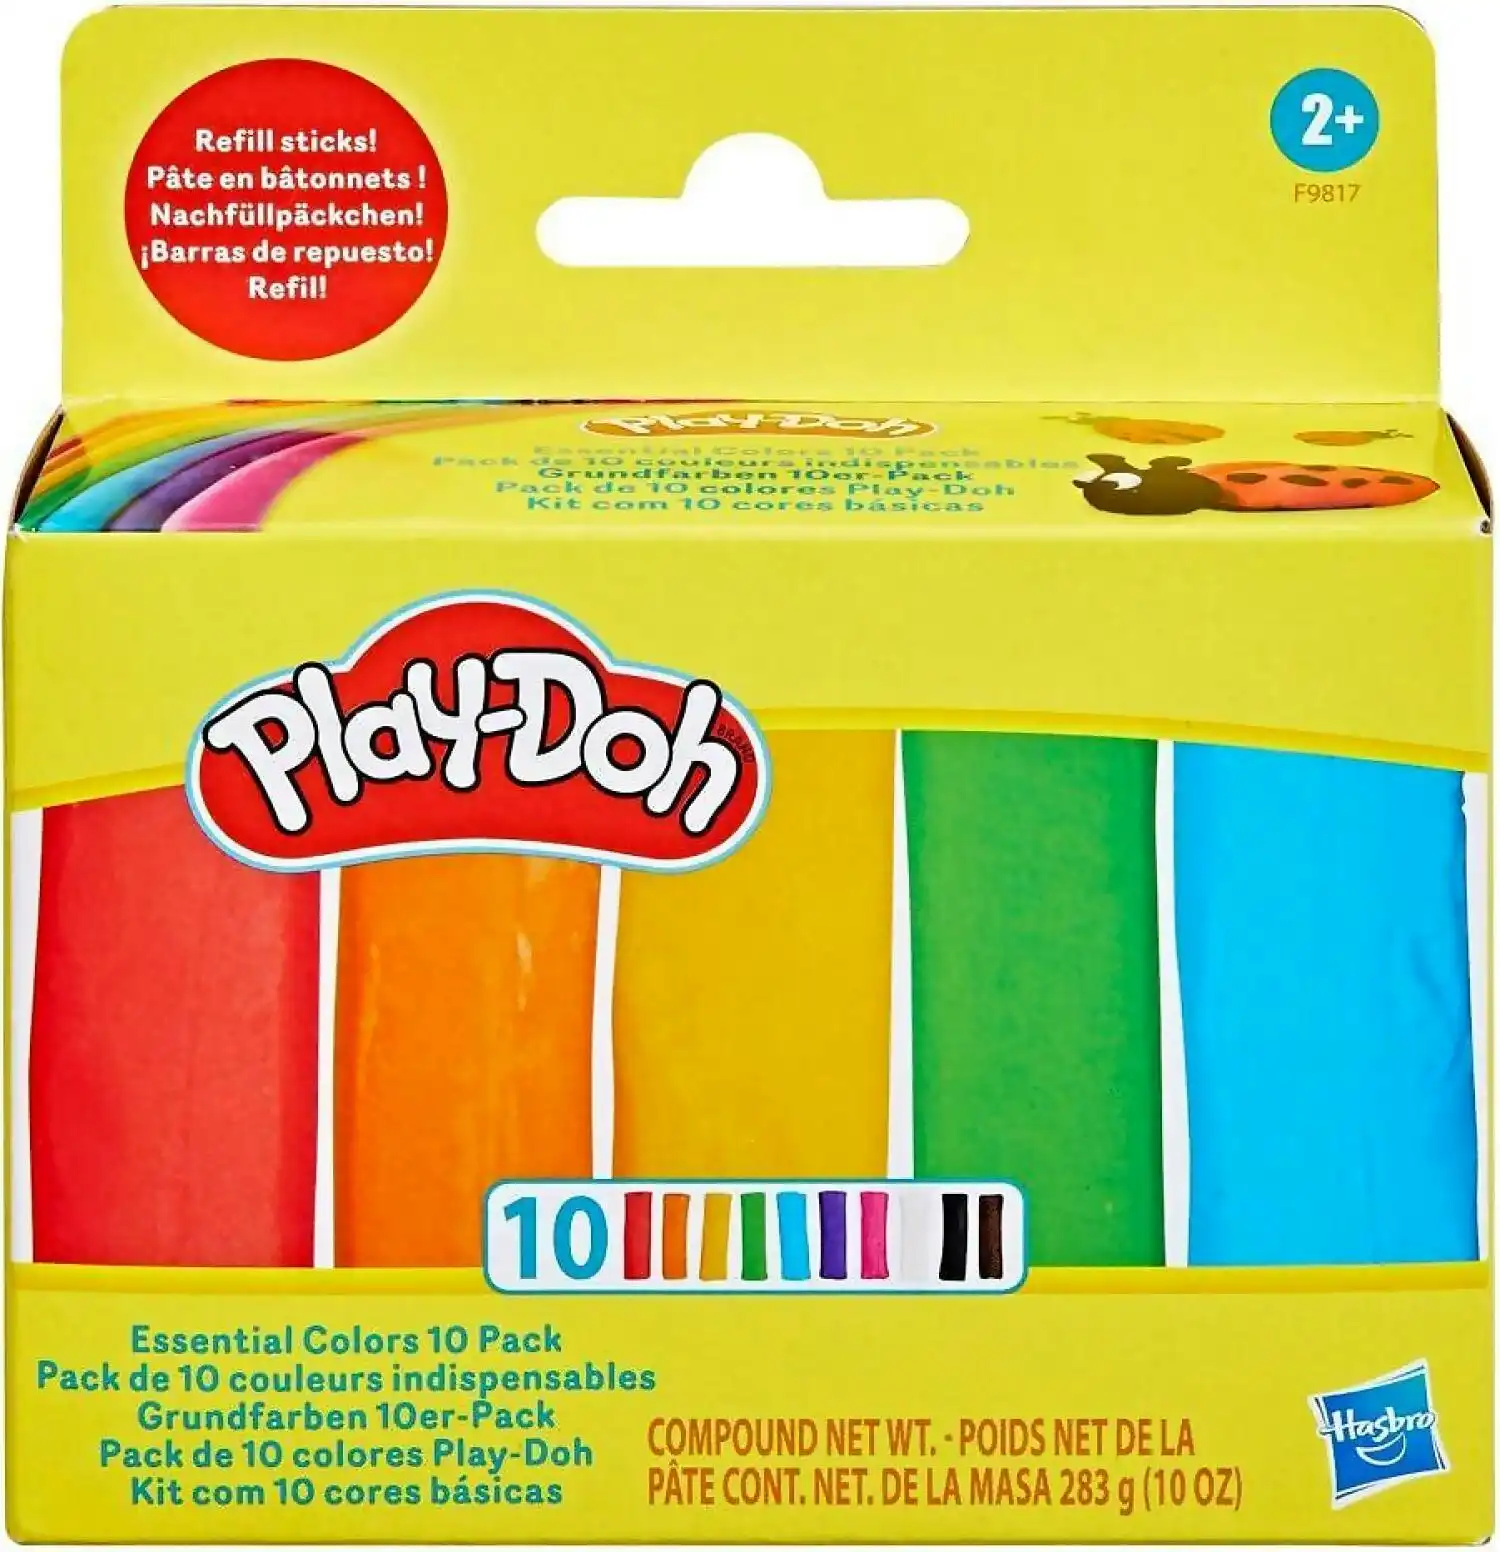 Play-doh - Essential Colors 10 Pack Of Refill Sticks Kids Arts And Crafts Toys 2+ - Hasbro